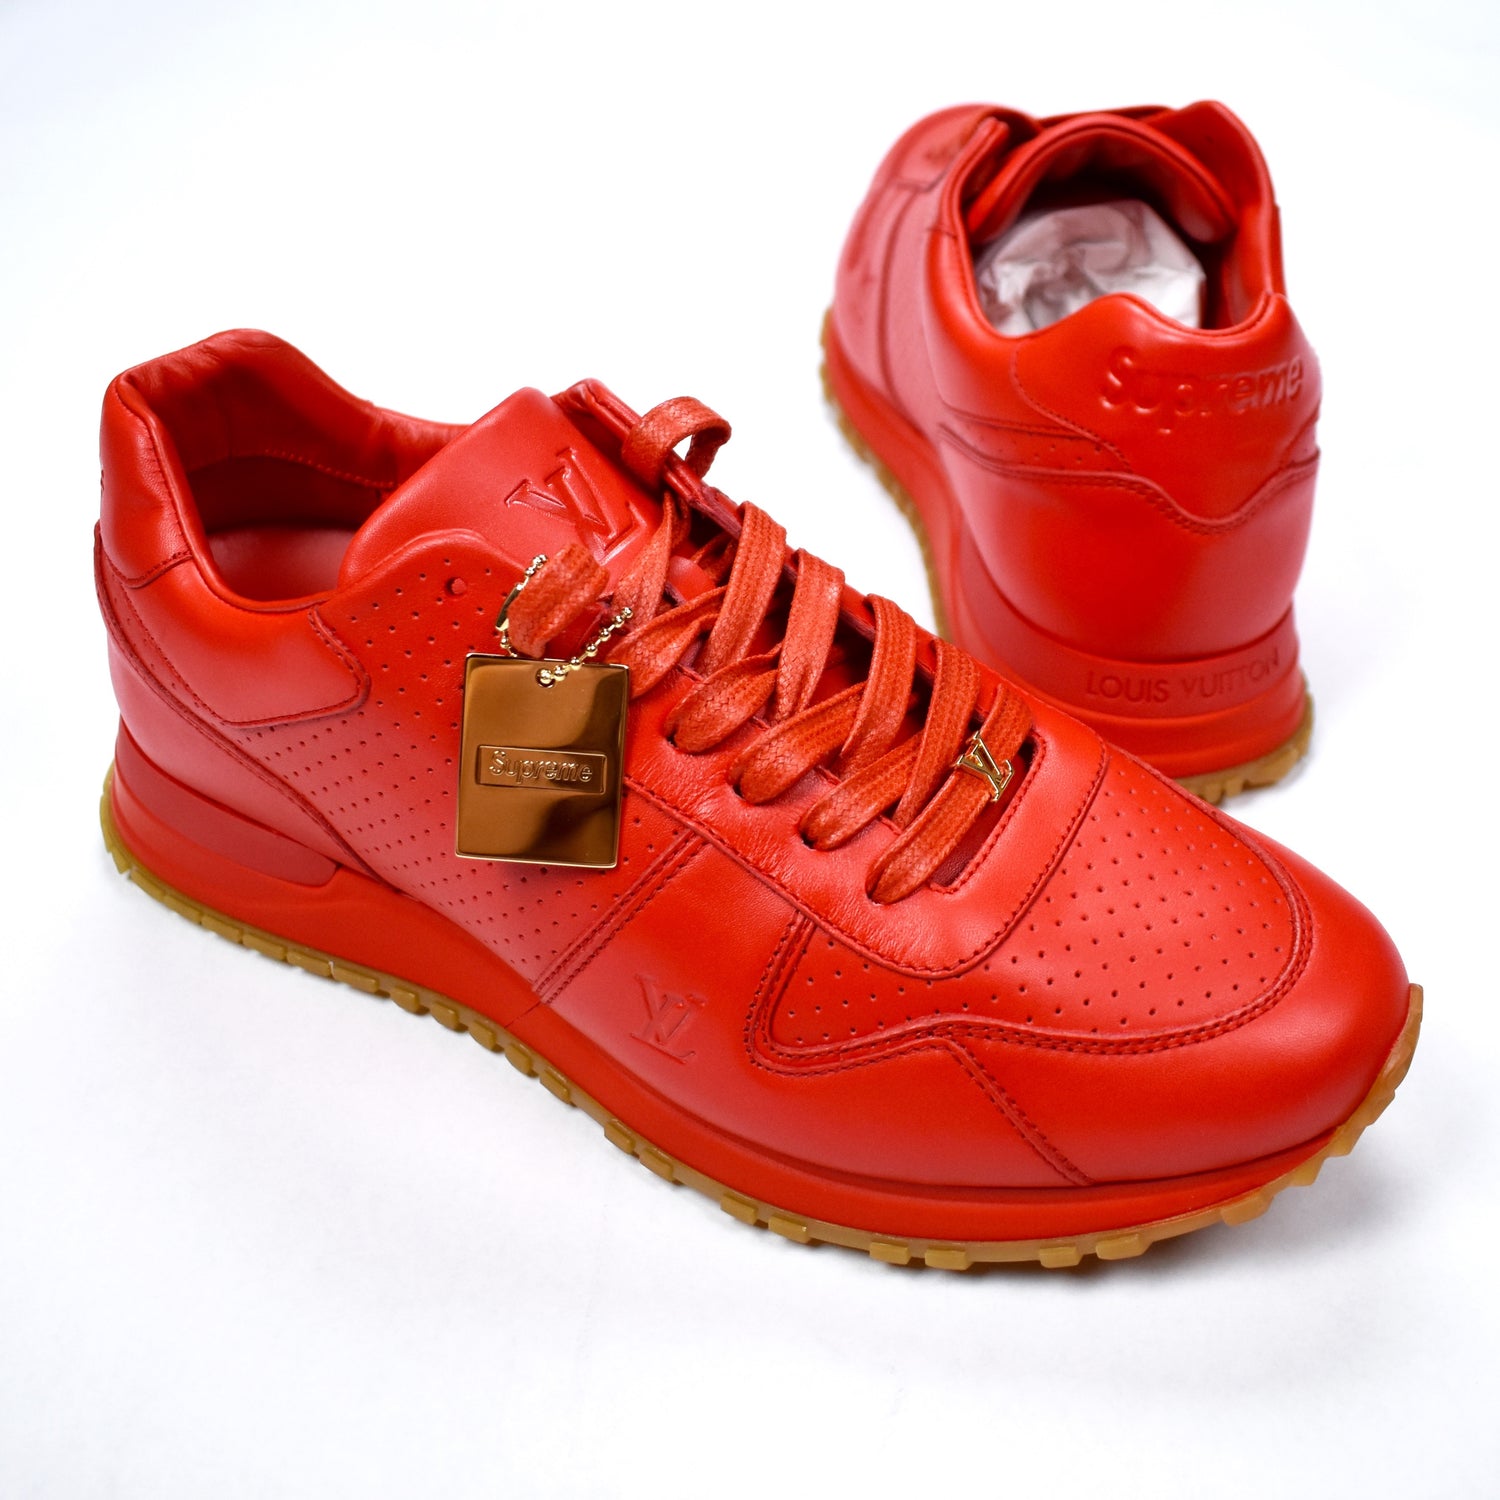 Louis Vuitton x Supreme LV New Run Away Lace Up Sneaker Red Leather Italy  #AH556